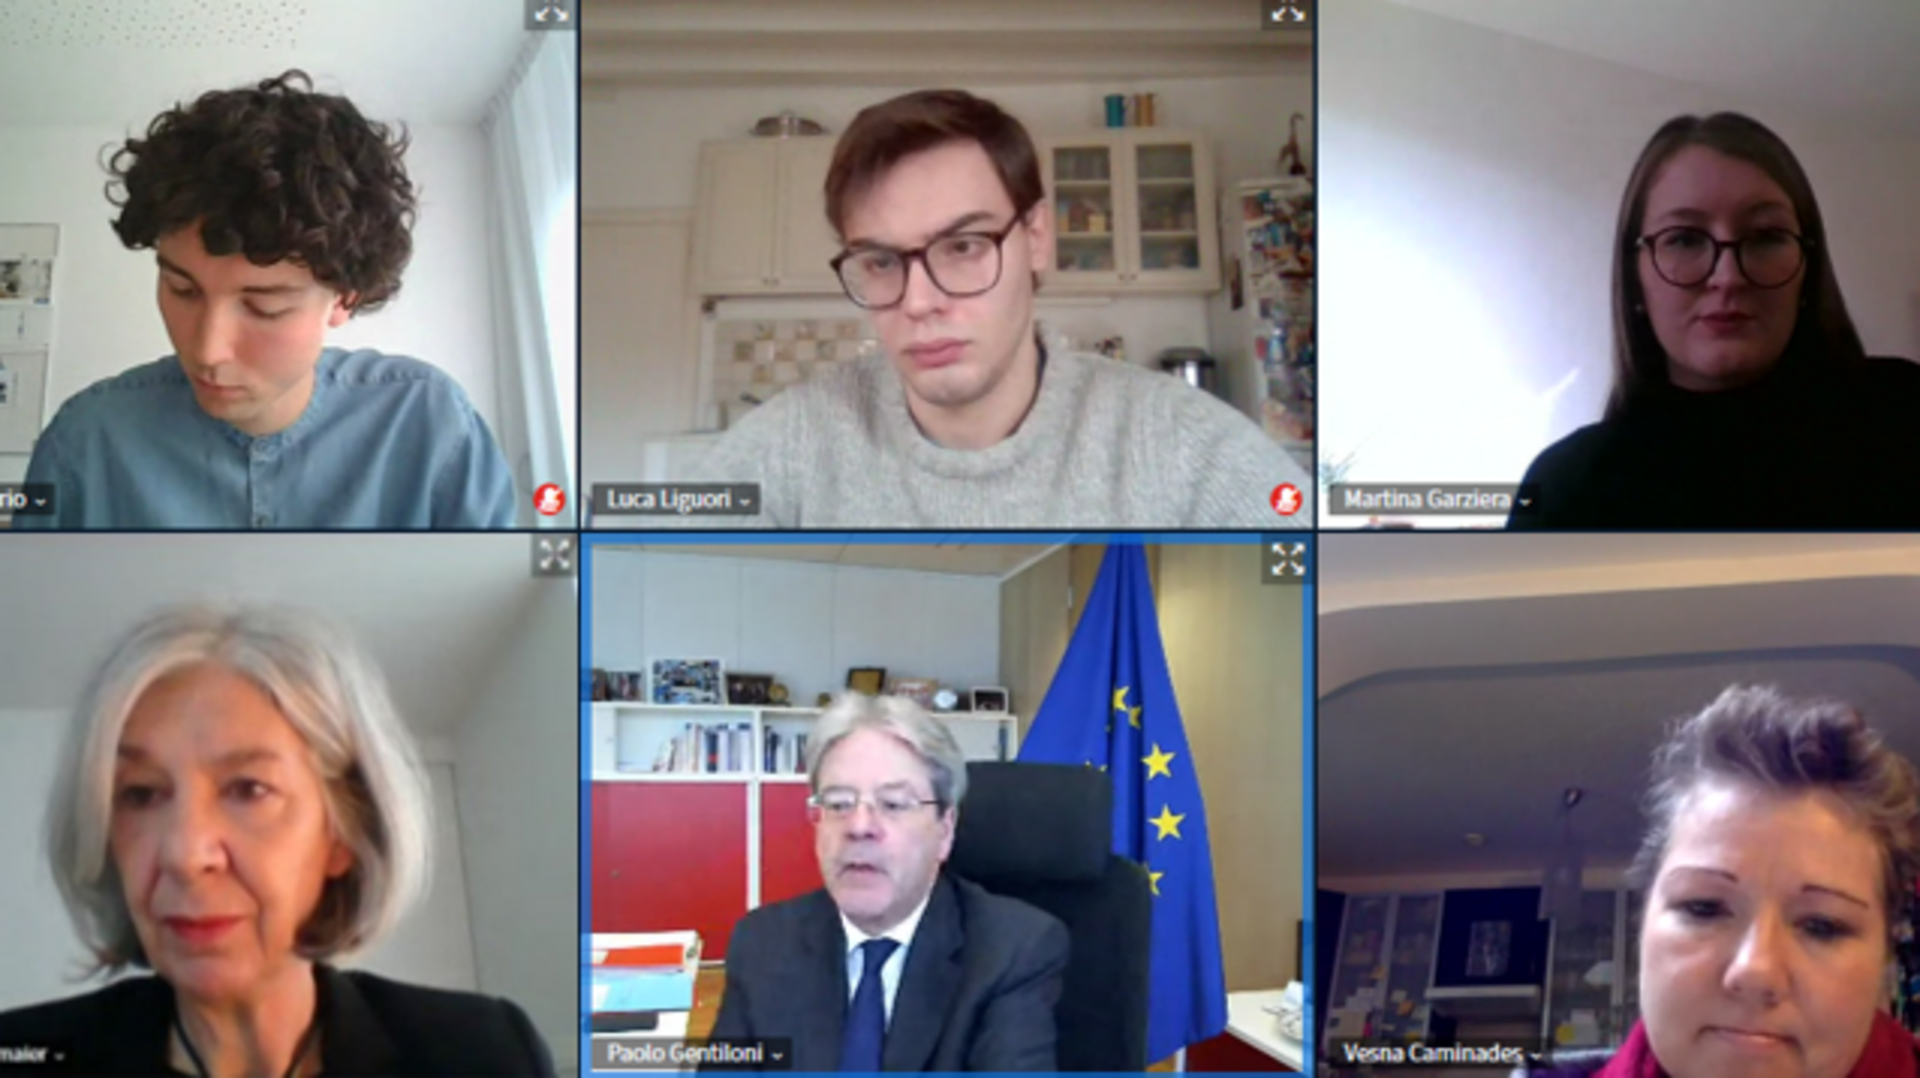 Screenshot of the online event with European Commissioner Paolo Gentiloni and the participants